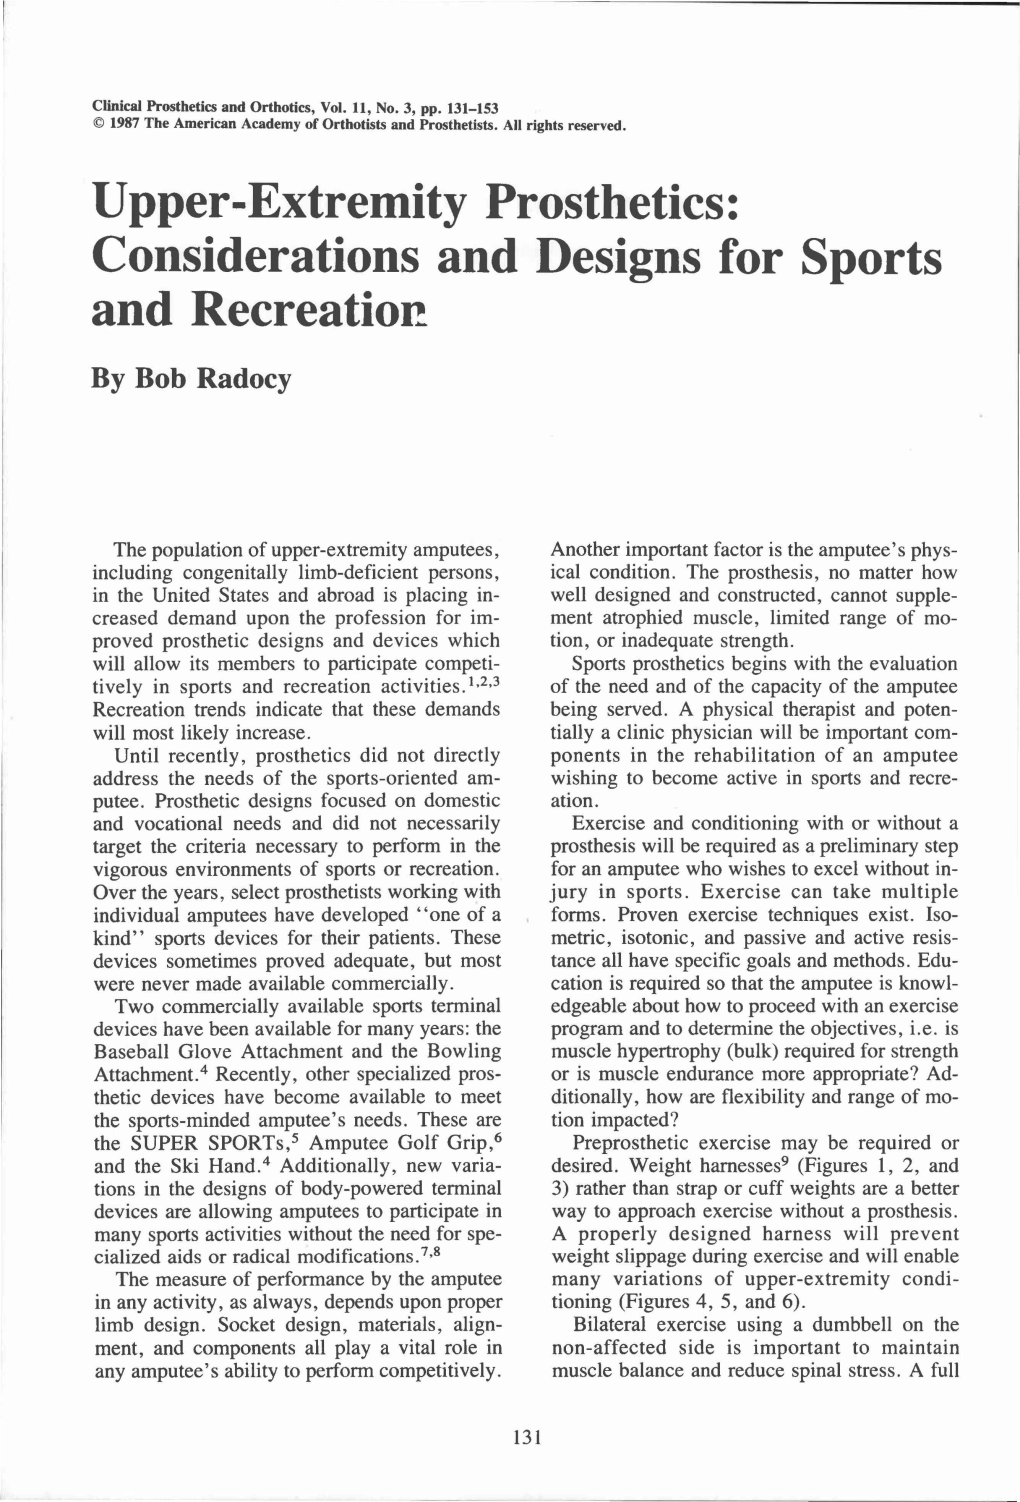 Upper-Extremity Prosthetics: Considerations and Designs for Sports and Recreation